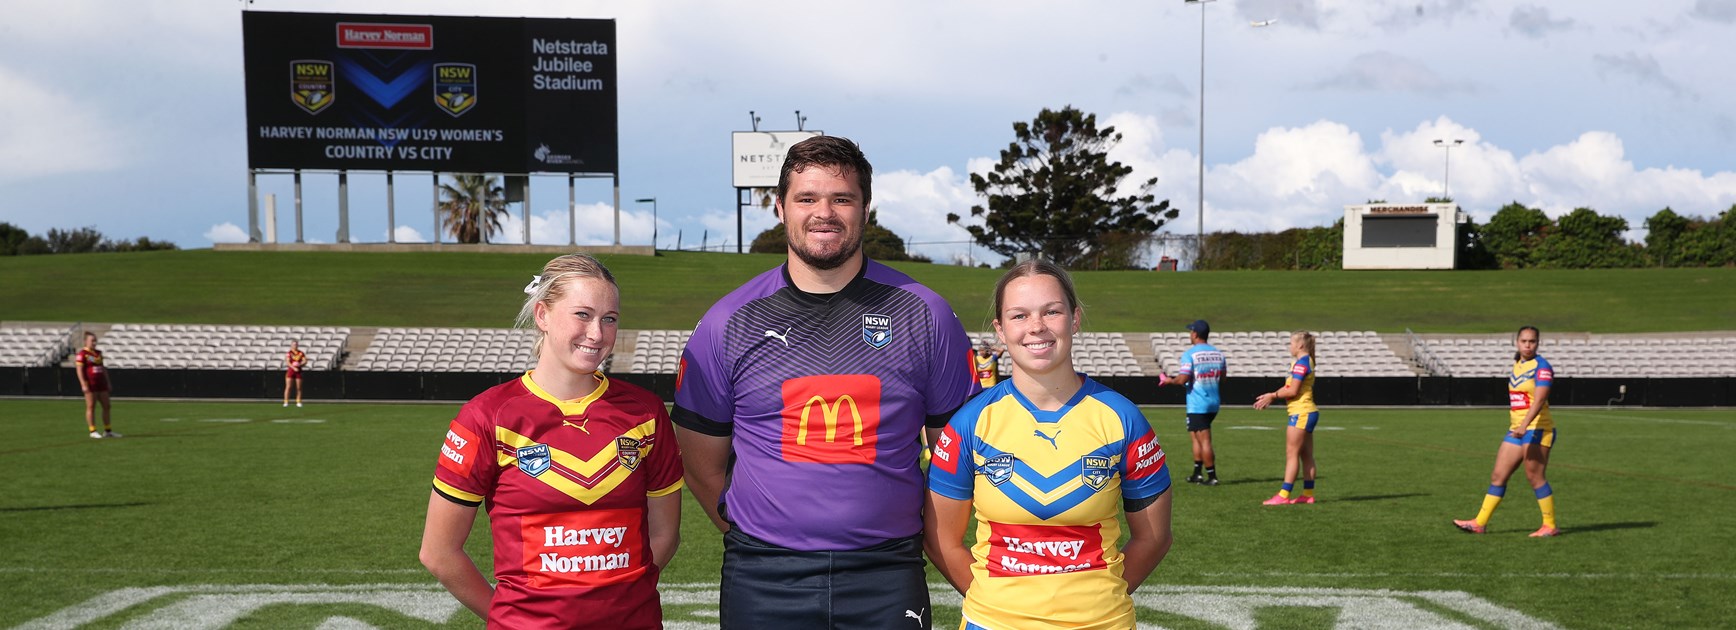 Three NSWRL teams vying for glory at women's nationals